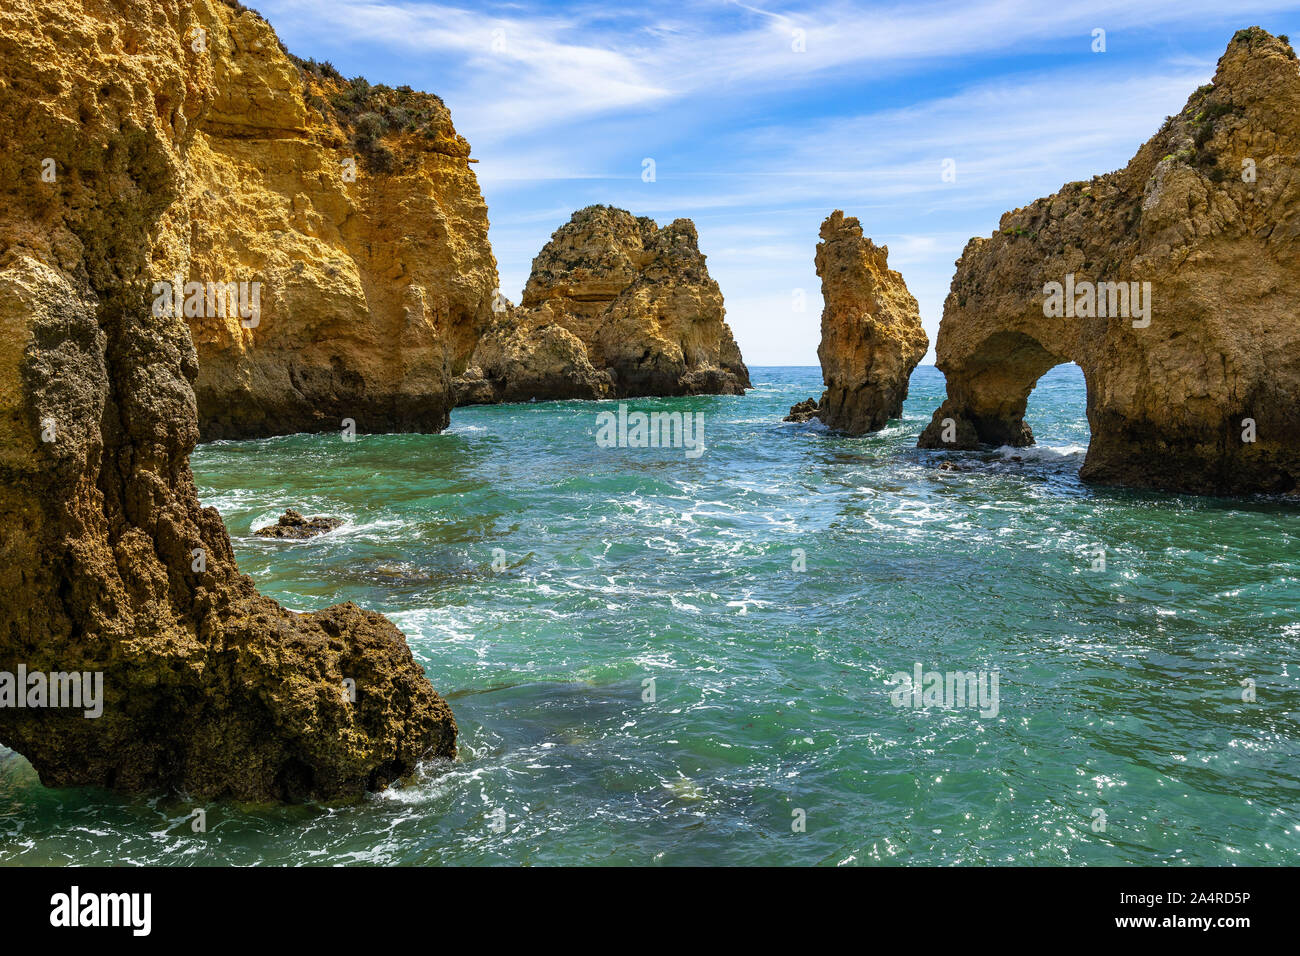 Spectacular rock formations and cliffs at Ponta da Piedade, one of the most iconic landscape of Algarve, Portugal Stock Photo